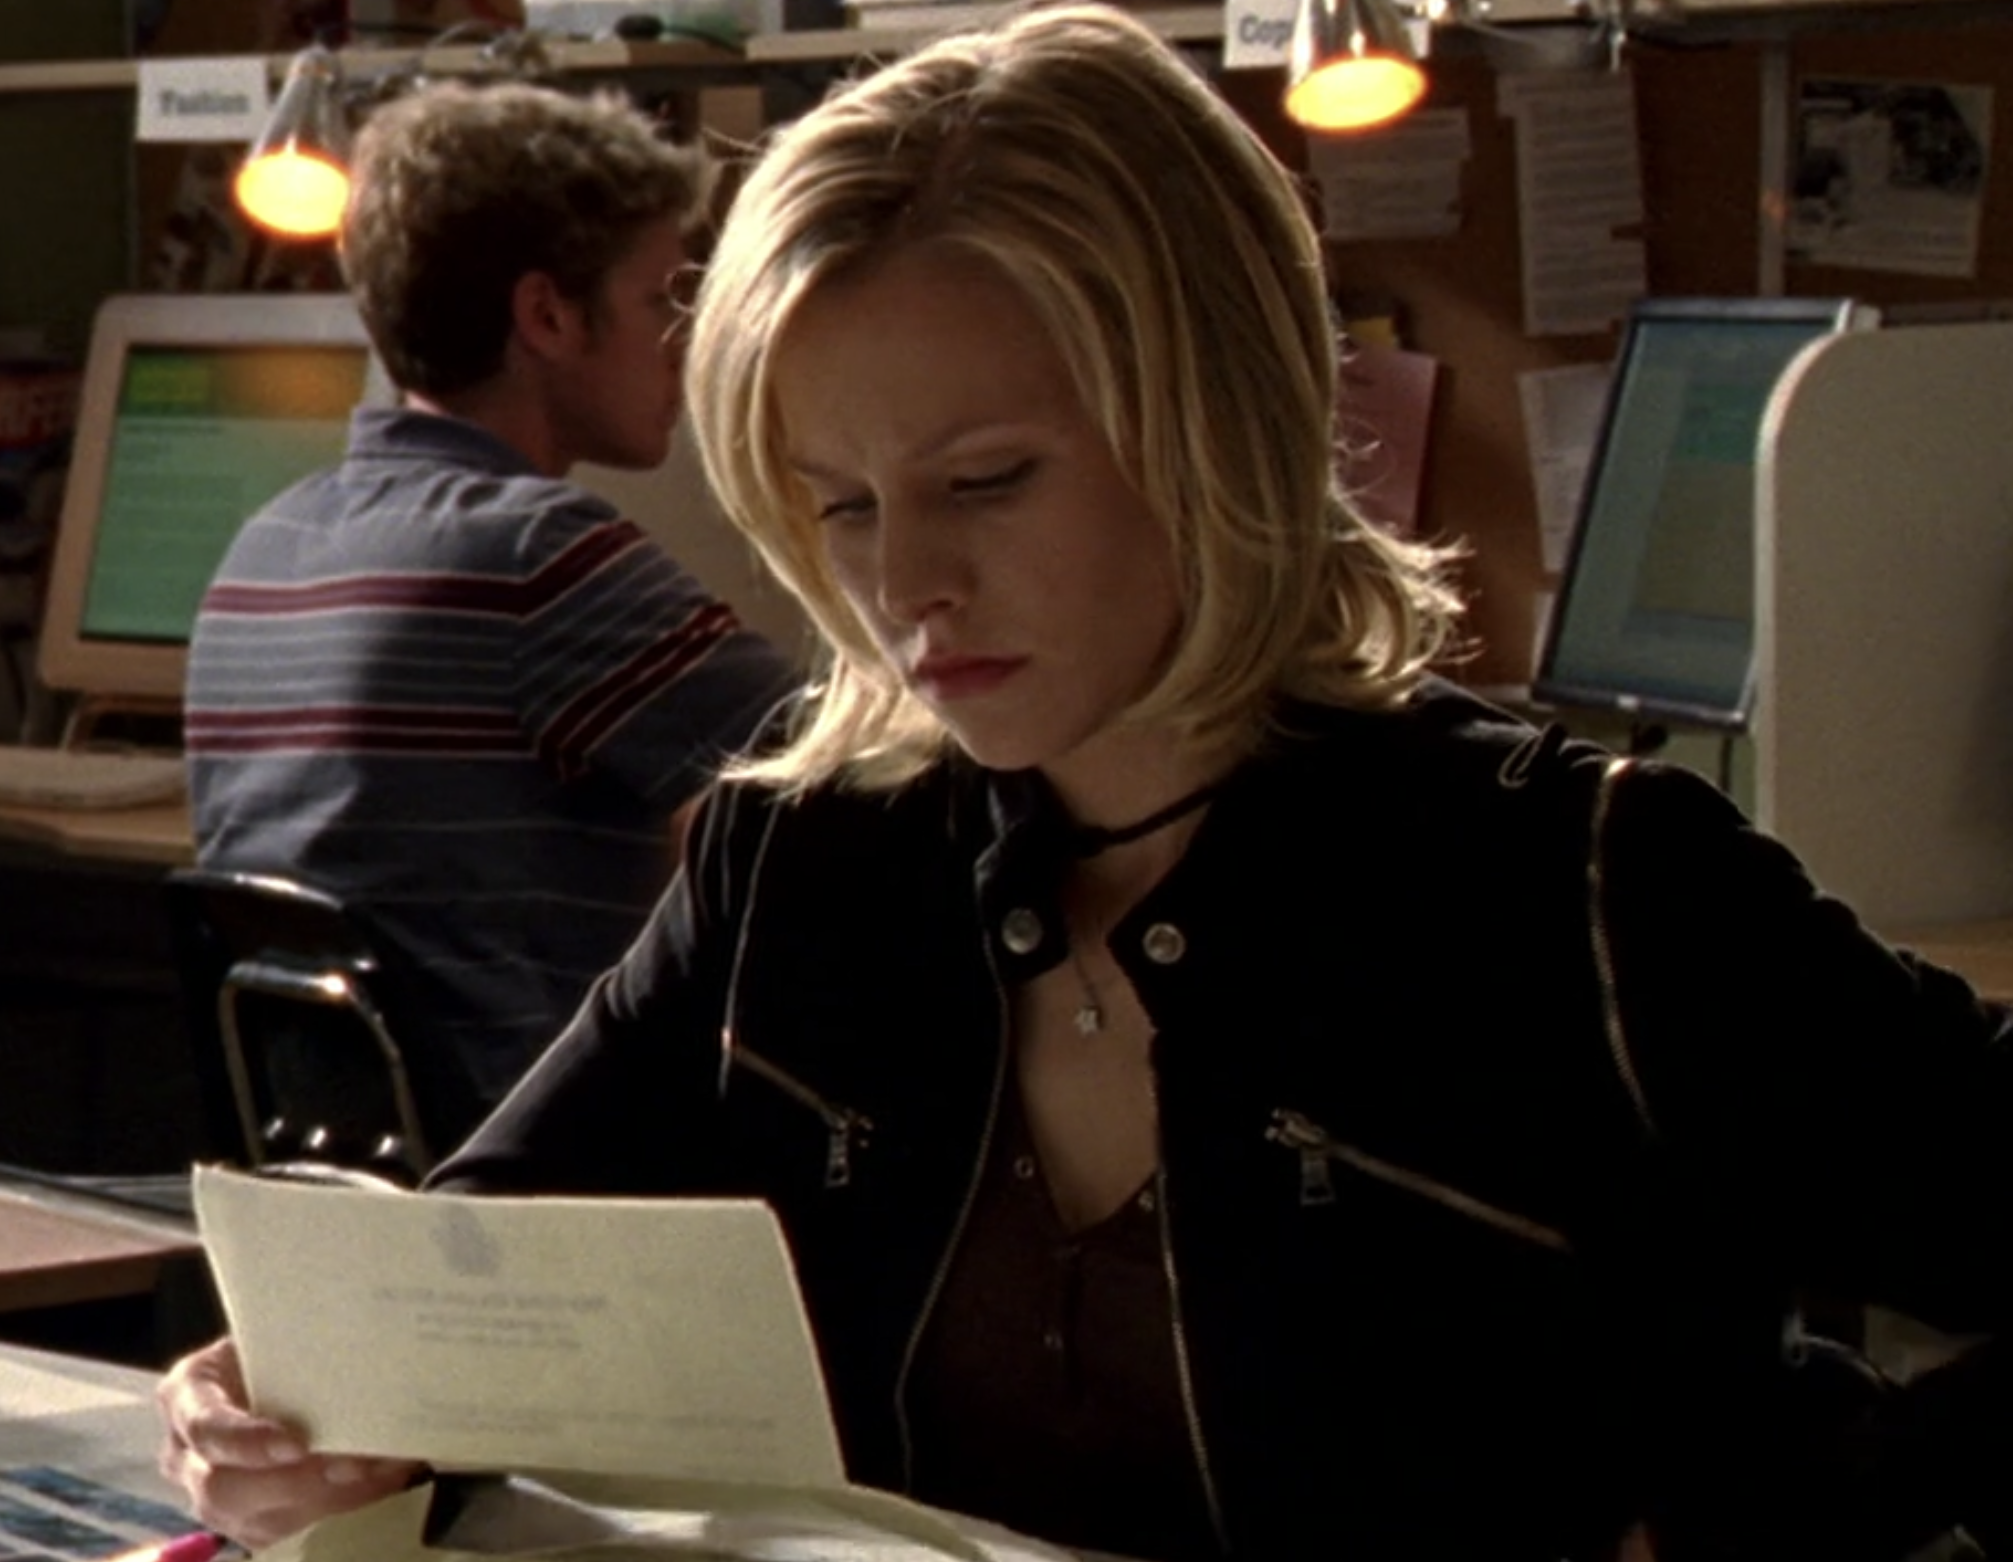 Screengrab from Veronica Mars. Veronica is in a computer lab looking at a piece of paper she is holding in her hand. She has a look of concentration on her face.